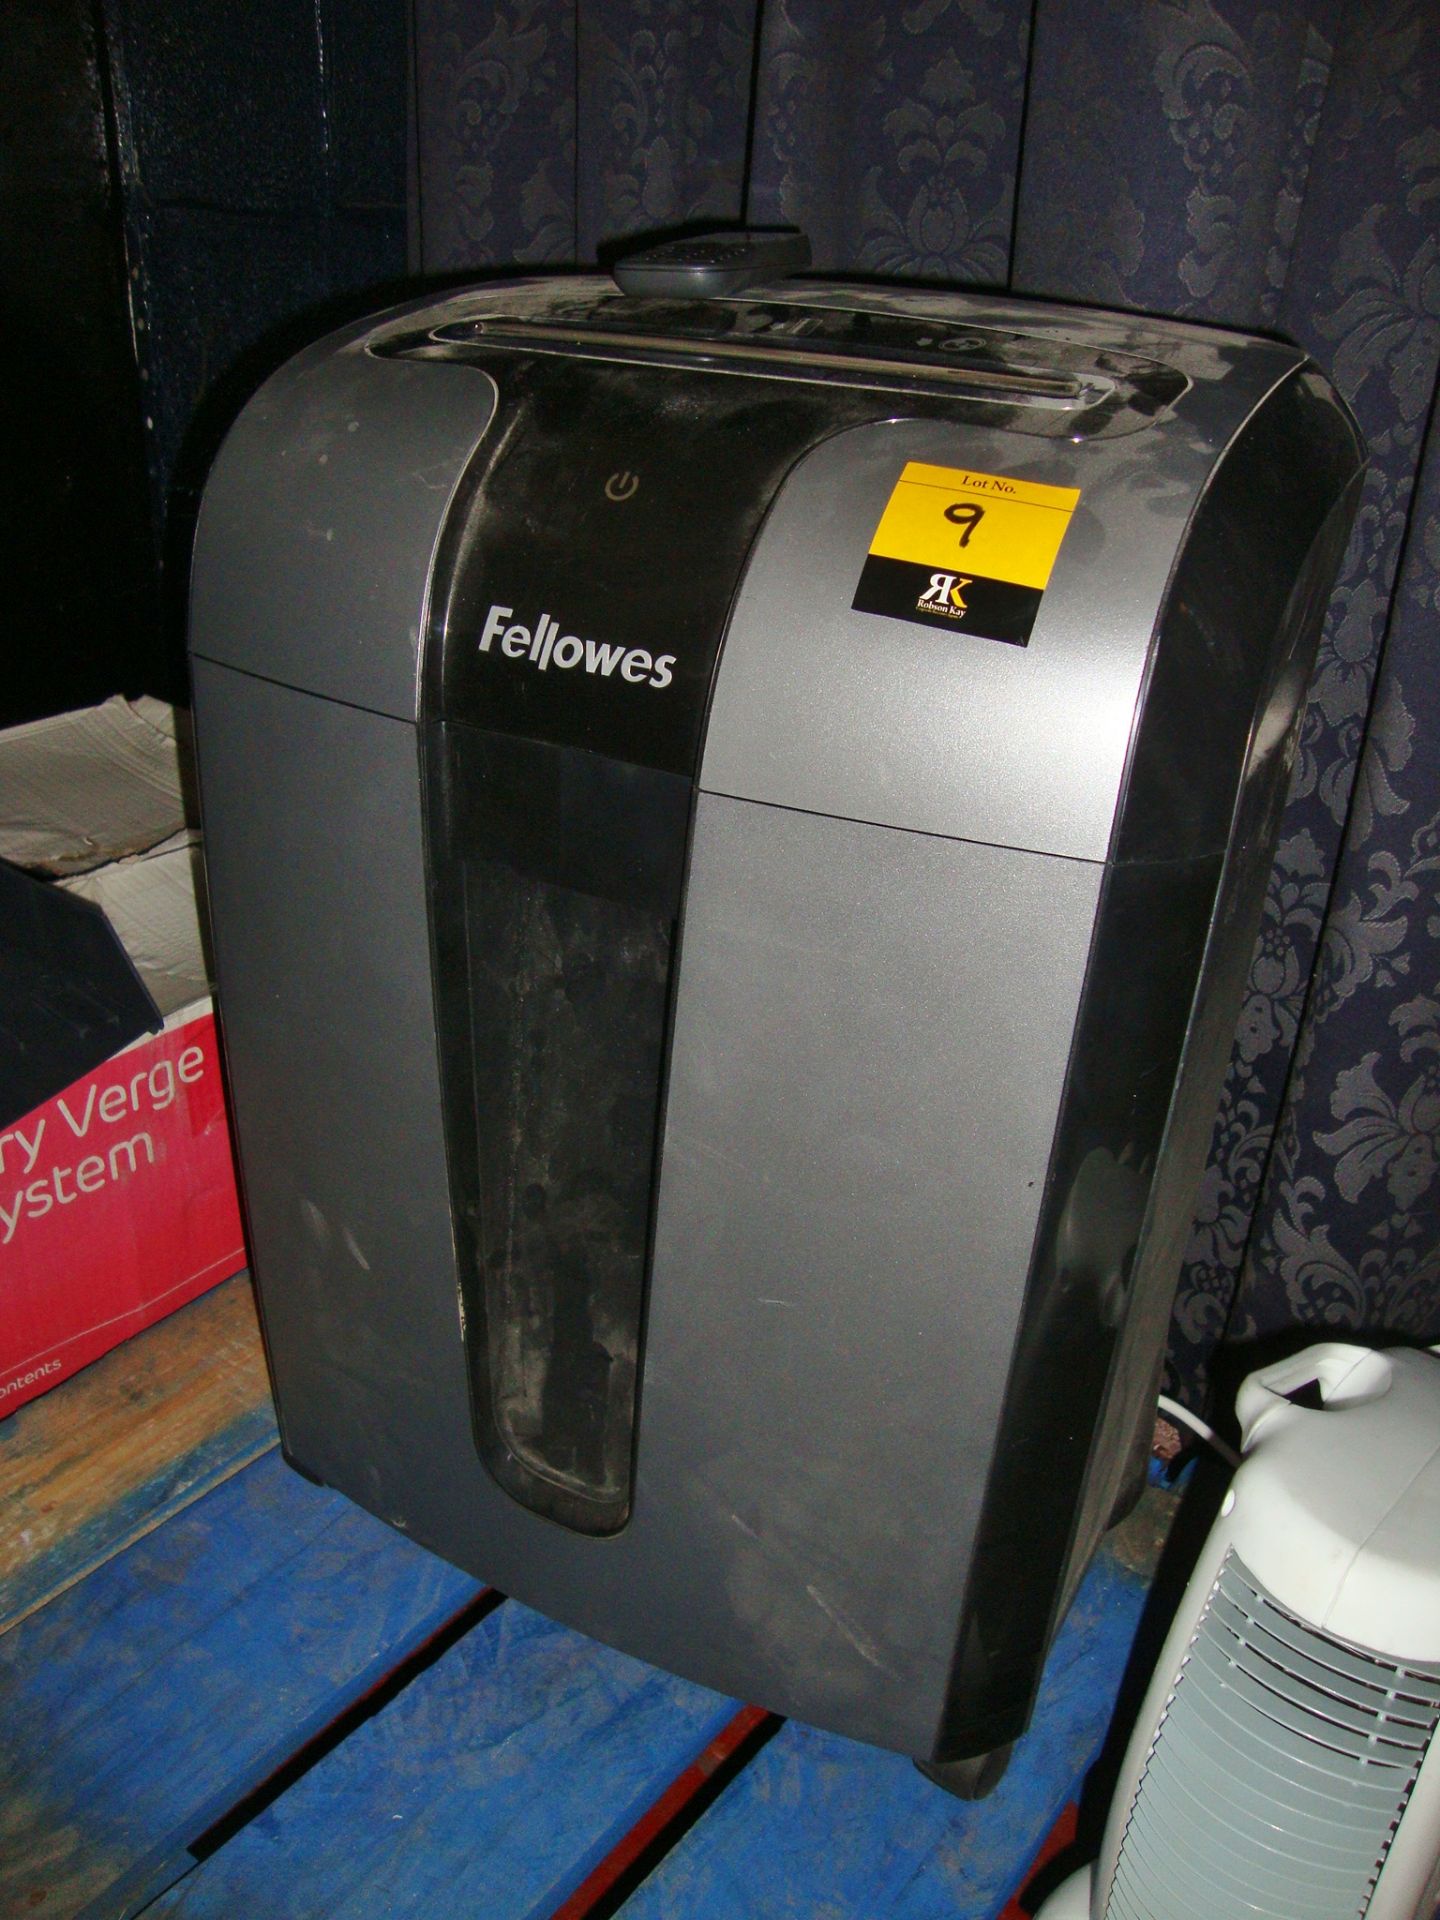 Office equipment comprising Fellowes shredder, Nokia mobile phone and small fan heater - Image 2 of 4